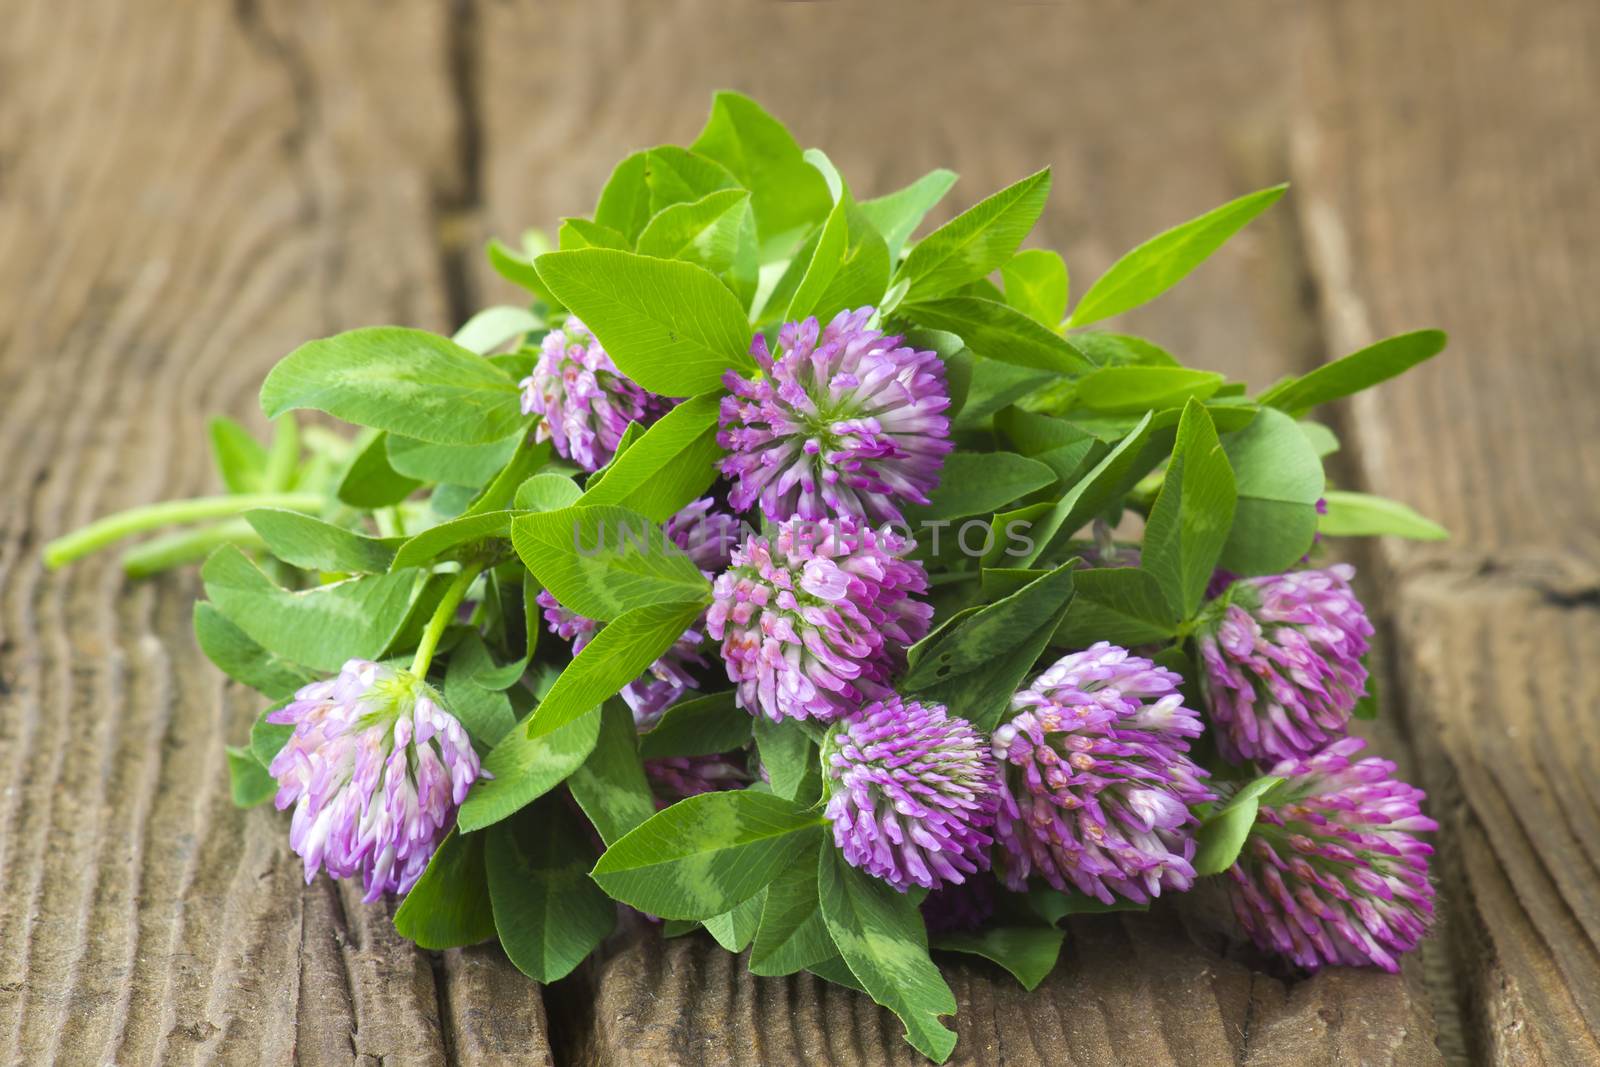 Bunch of clover on wooden background by miradrozdowski